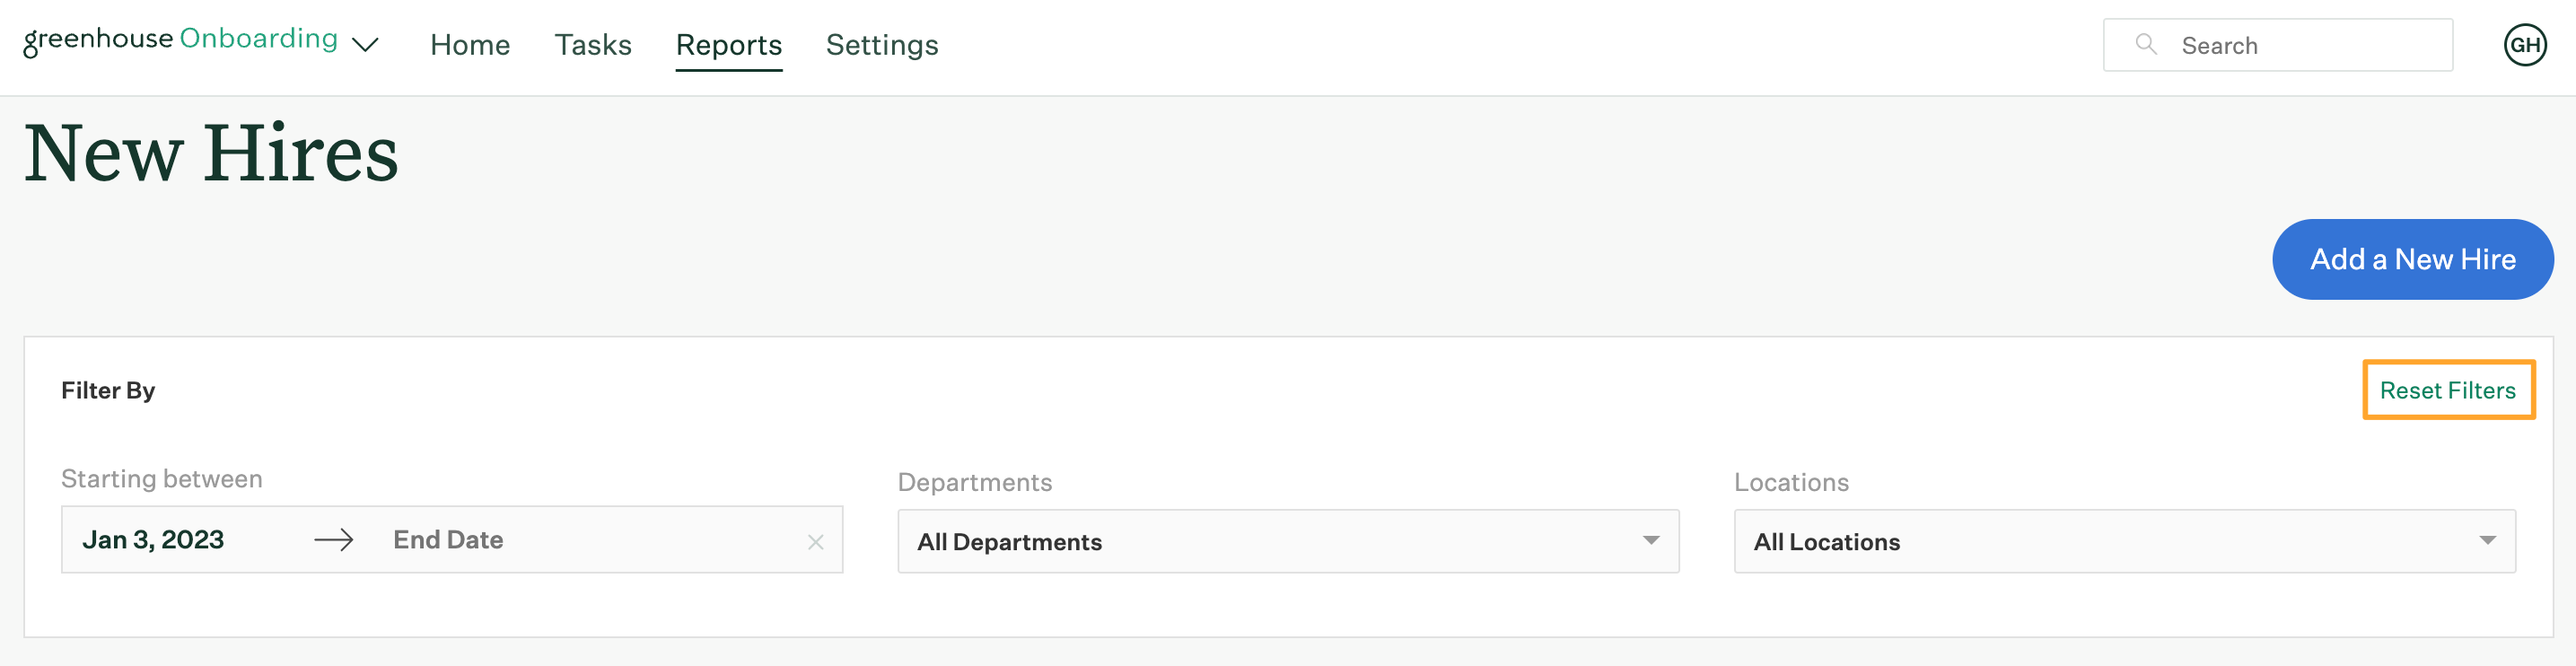 Screenshot-of-new-hires-report-filters-with-reset-filters-button-highlighted.png